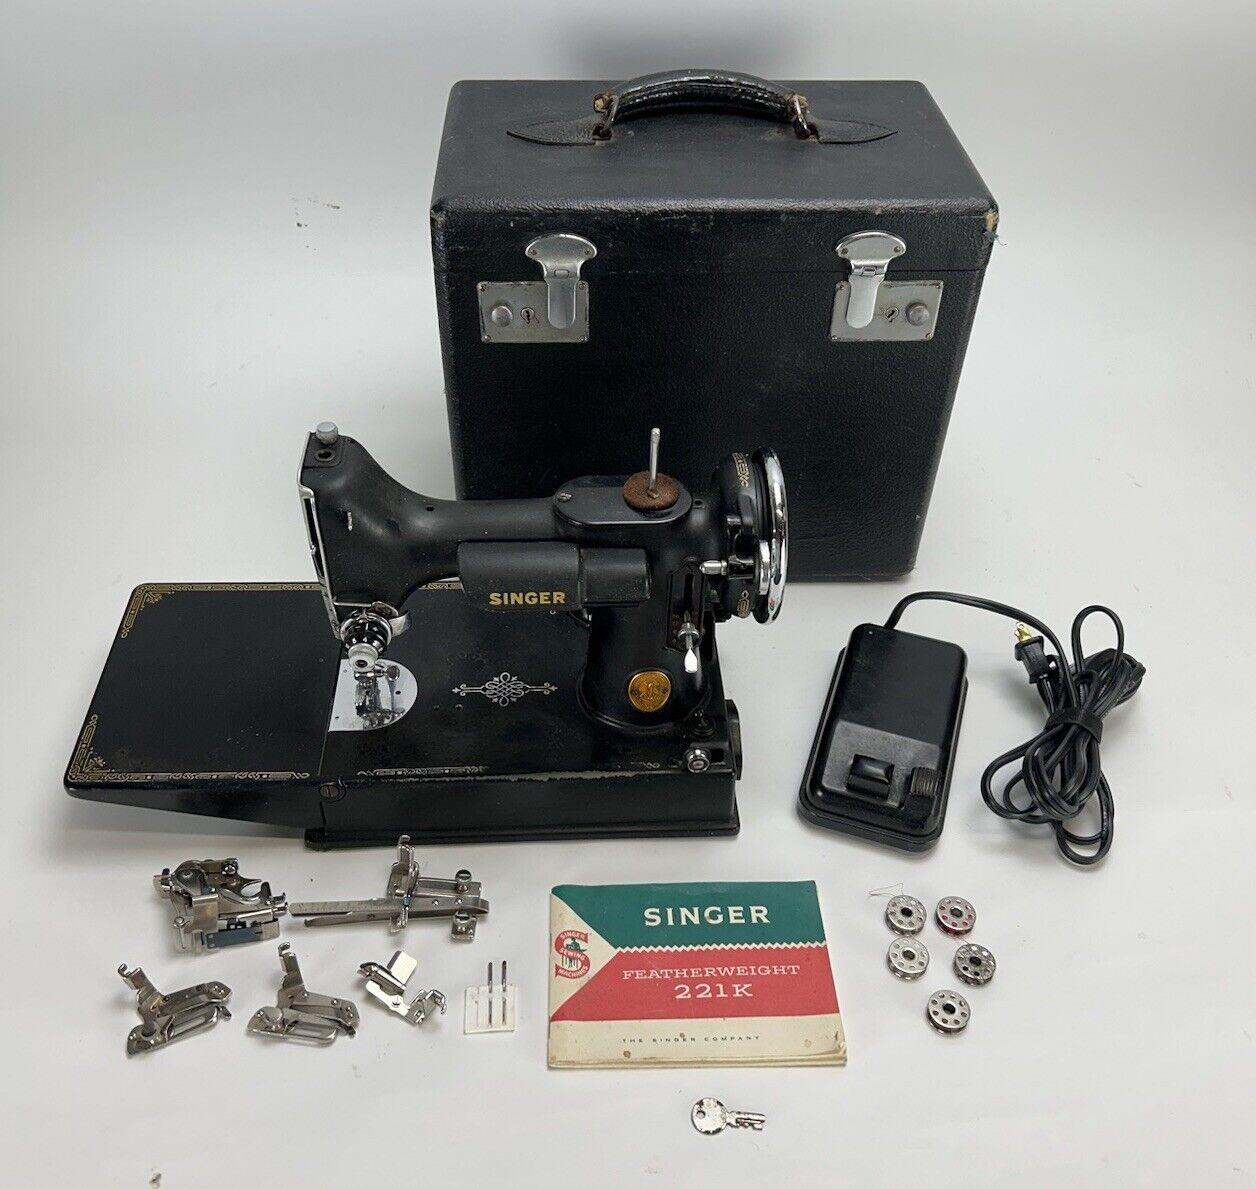 1941 Singer Featherweight 221 Portable Sewing Machine